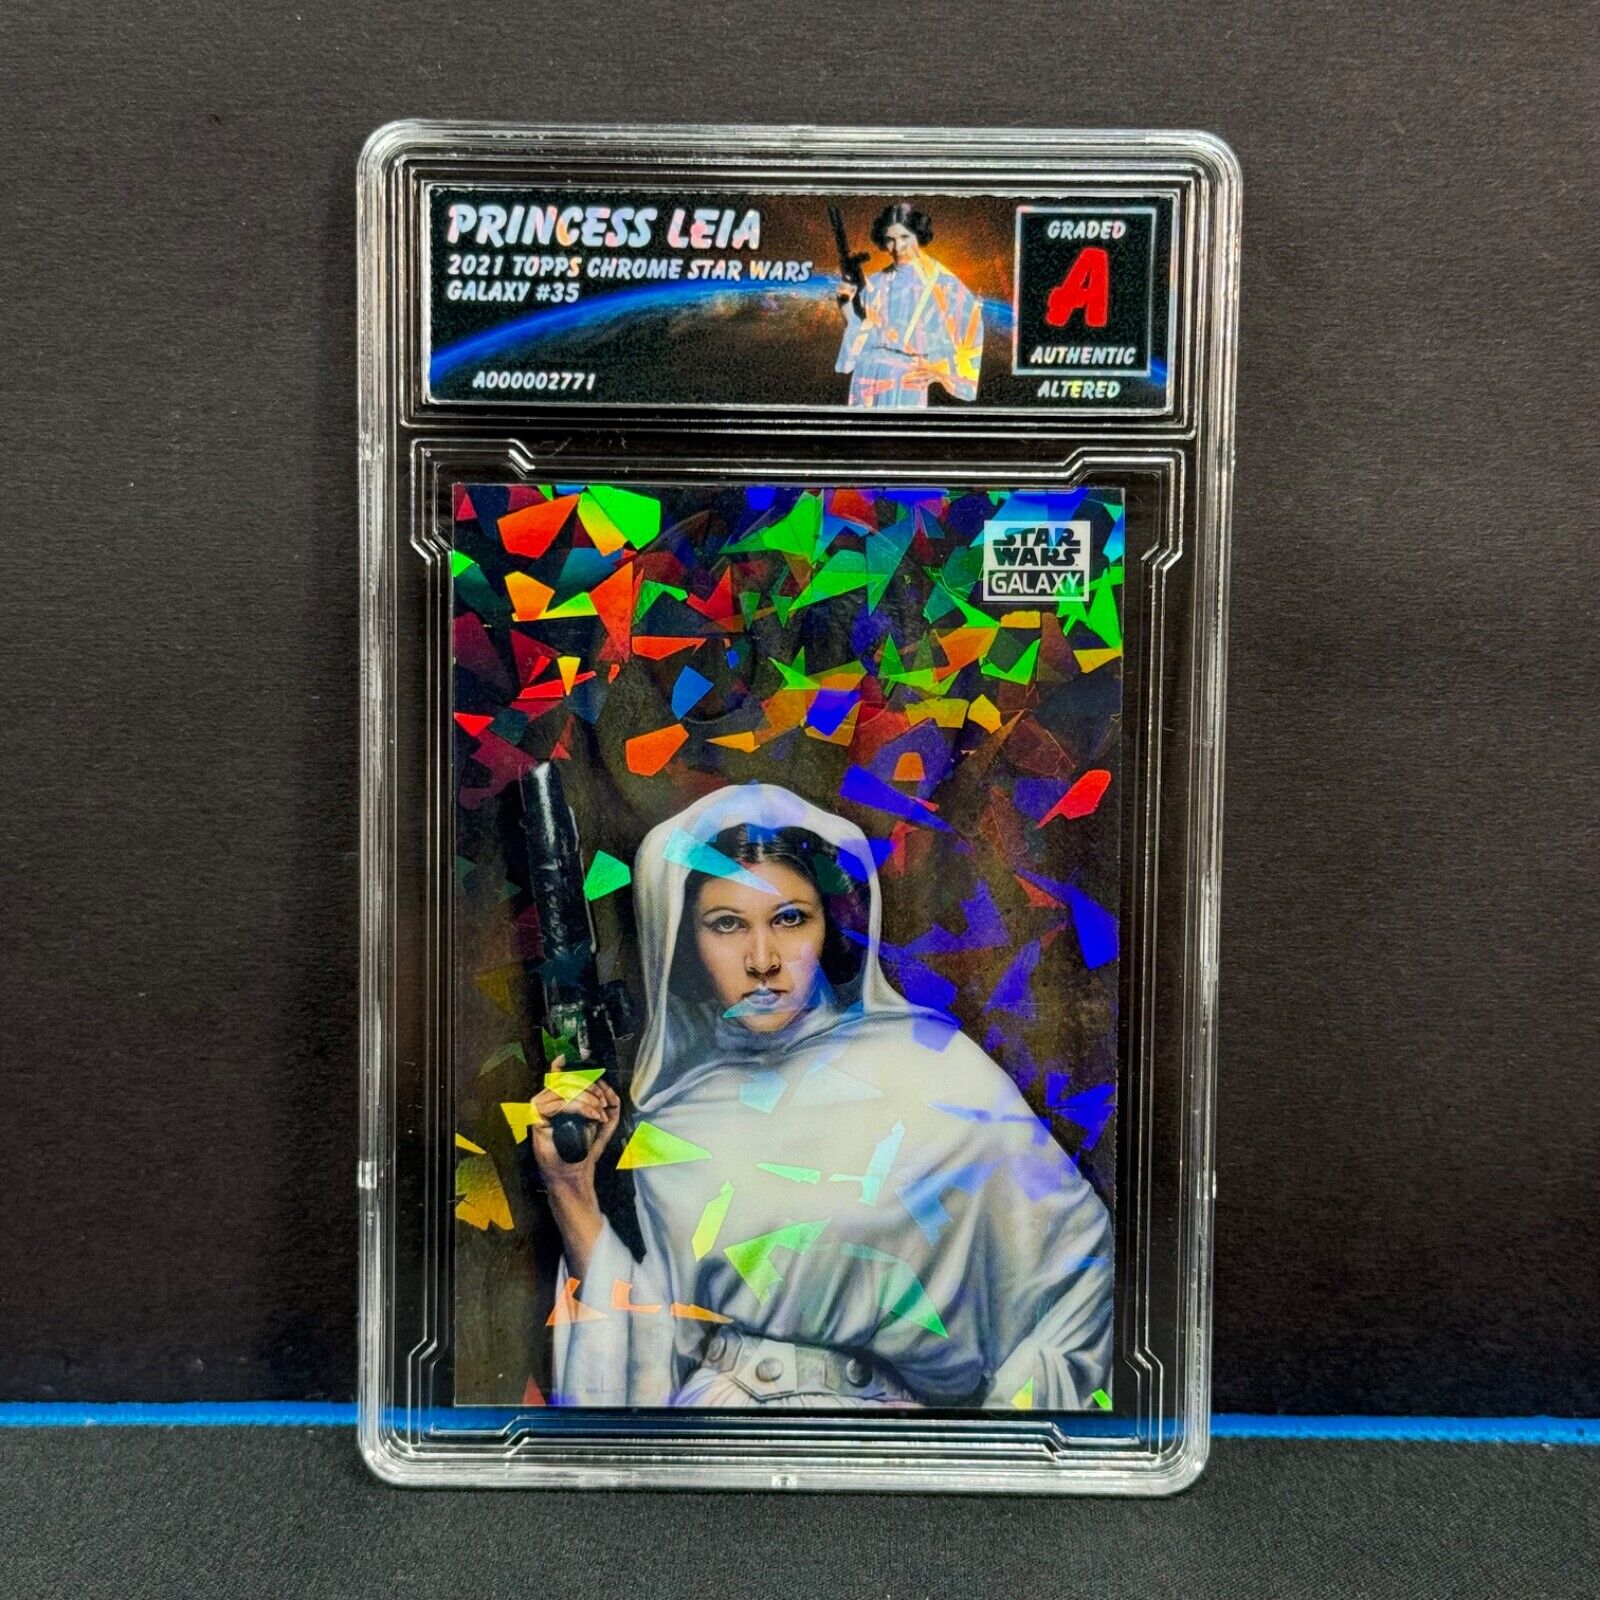 2021 Topps Chrome Star Wars Princess Leia #35 Cracked Ice Altered Refractor 